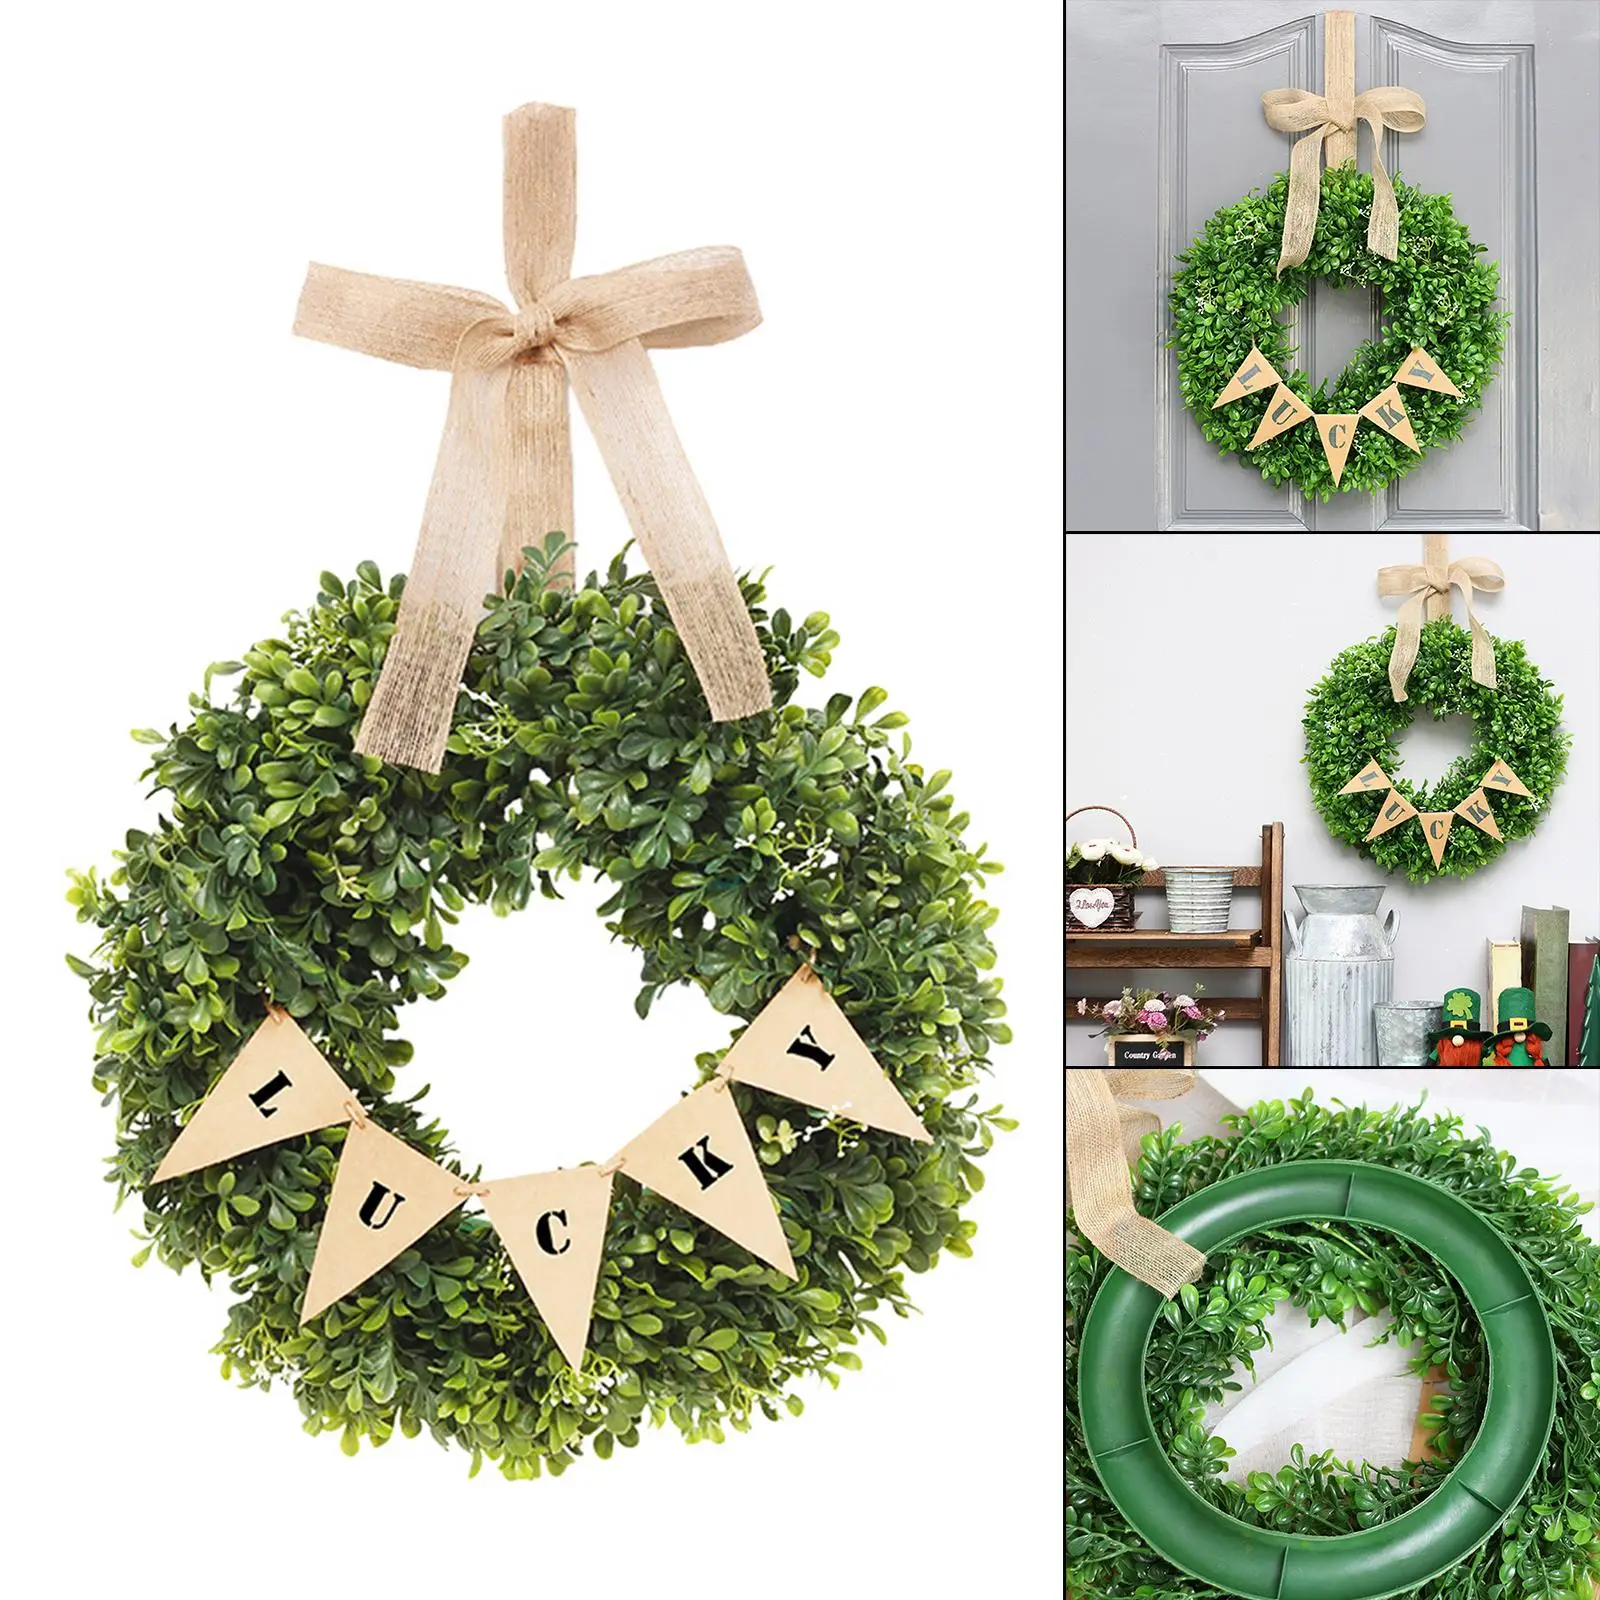 40cm Easter Greenery Wreath Spring Wreaths Window Party Decor ,Durable Materials Suit for All Scenarios Widely Usages Home Décor